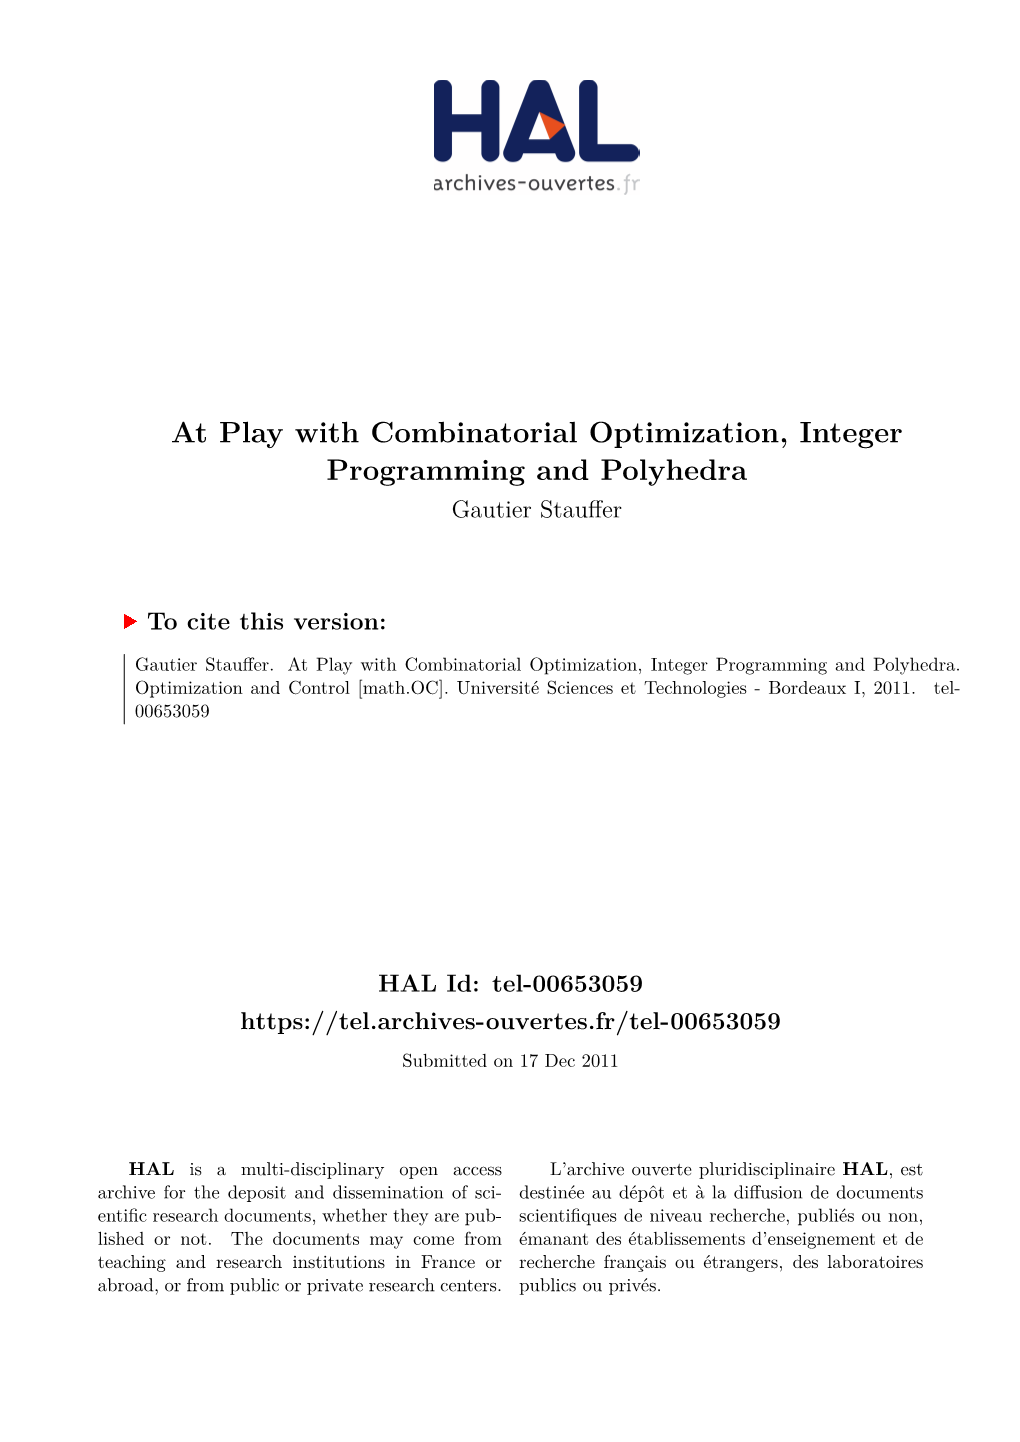 At Play with Combinatorial Optimization, Integer Programming and Polyhedra Gautier Stauffer